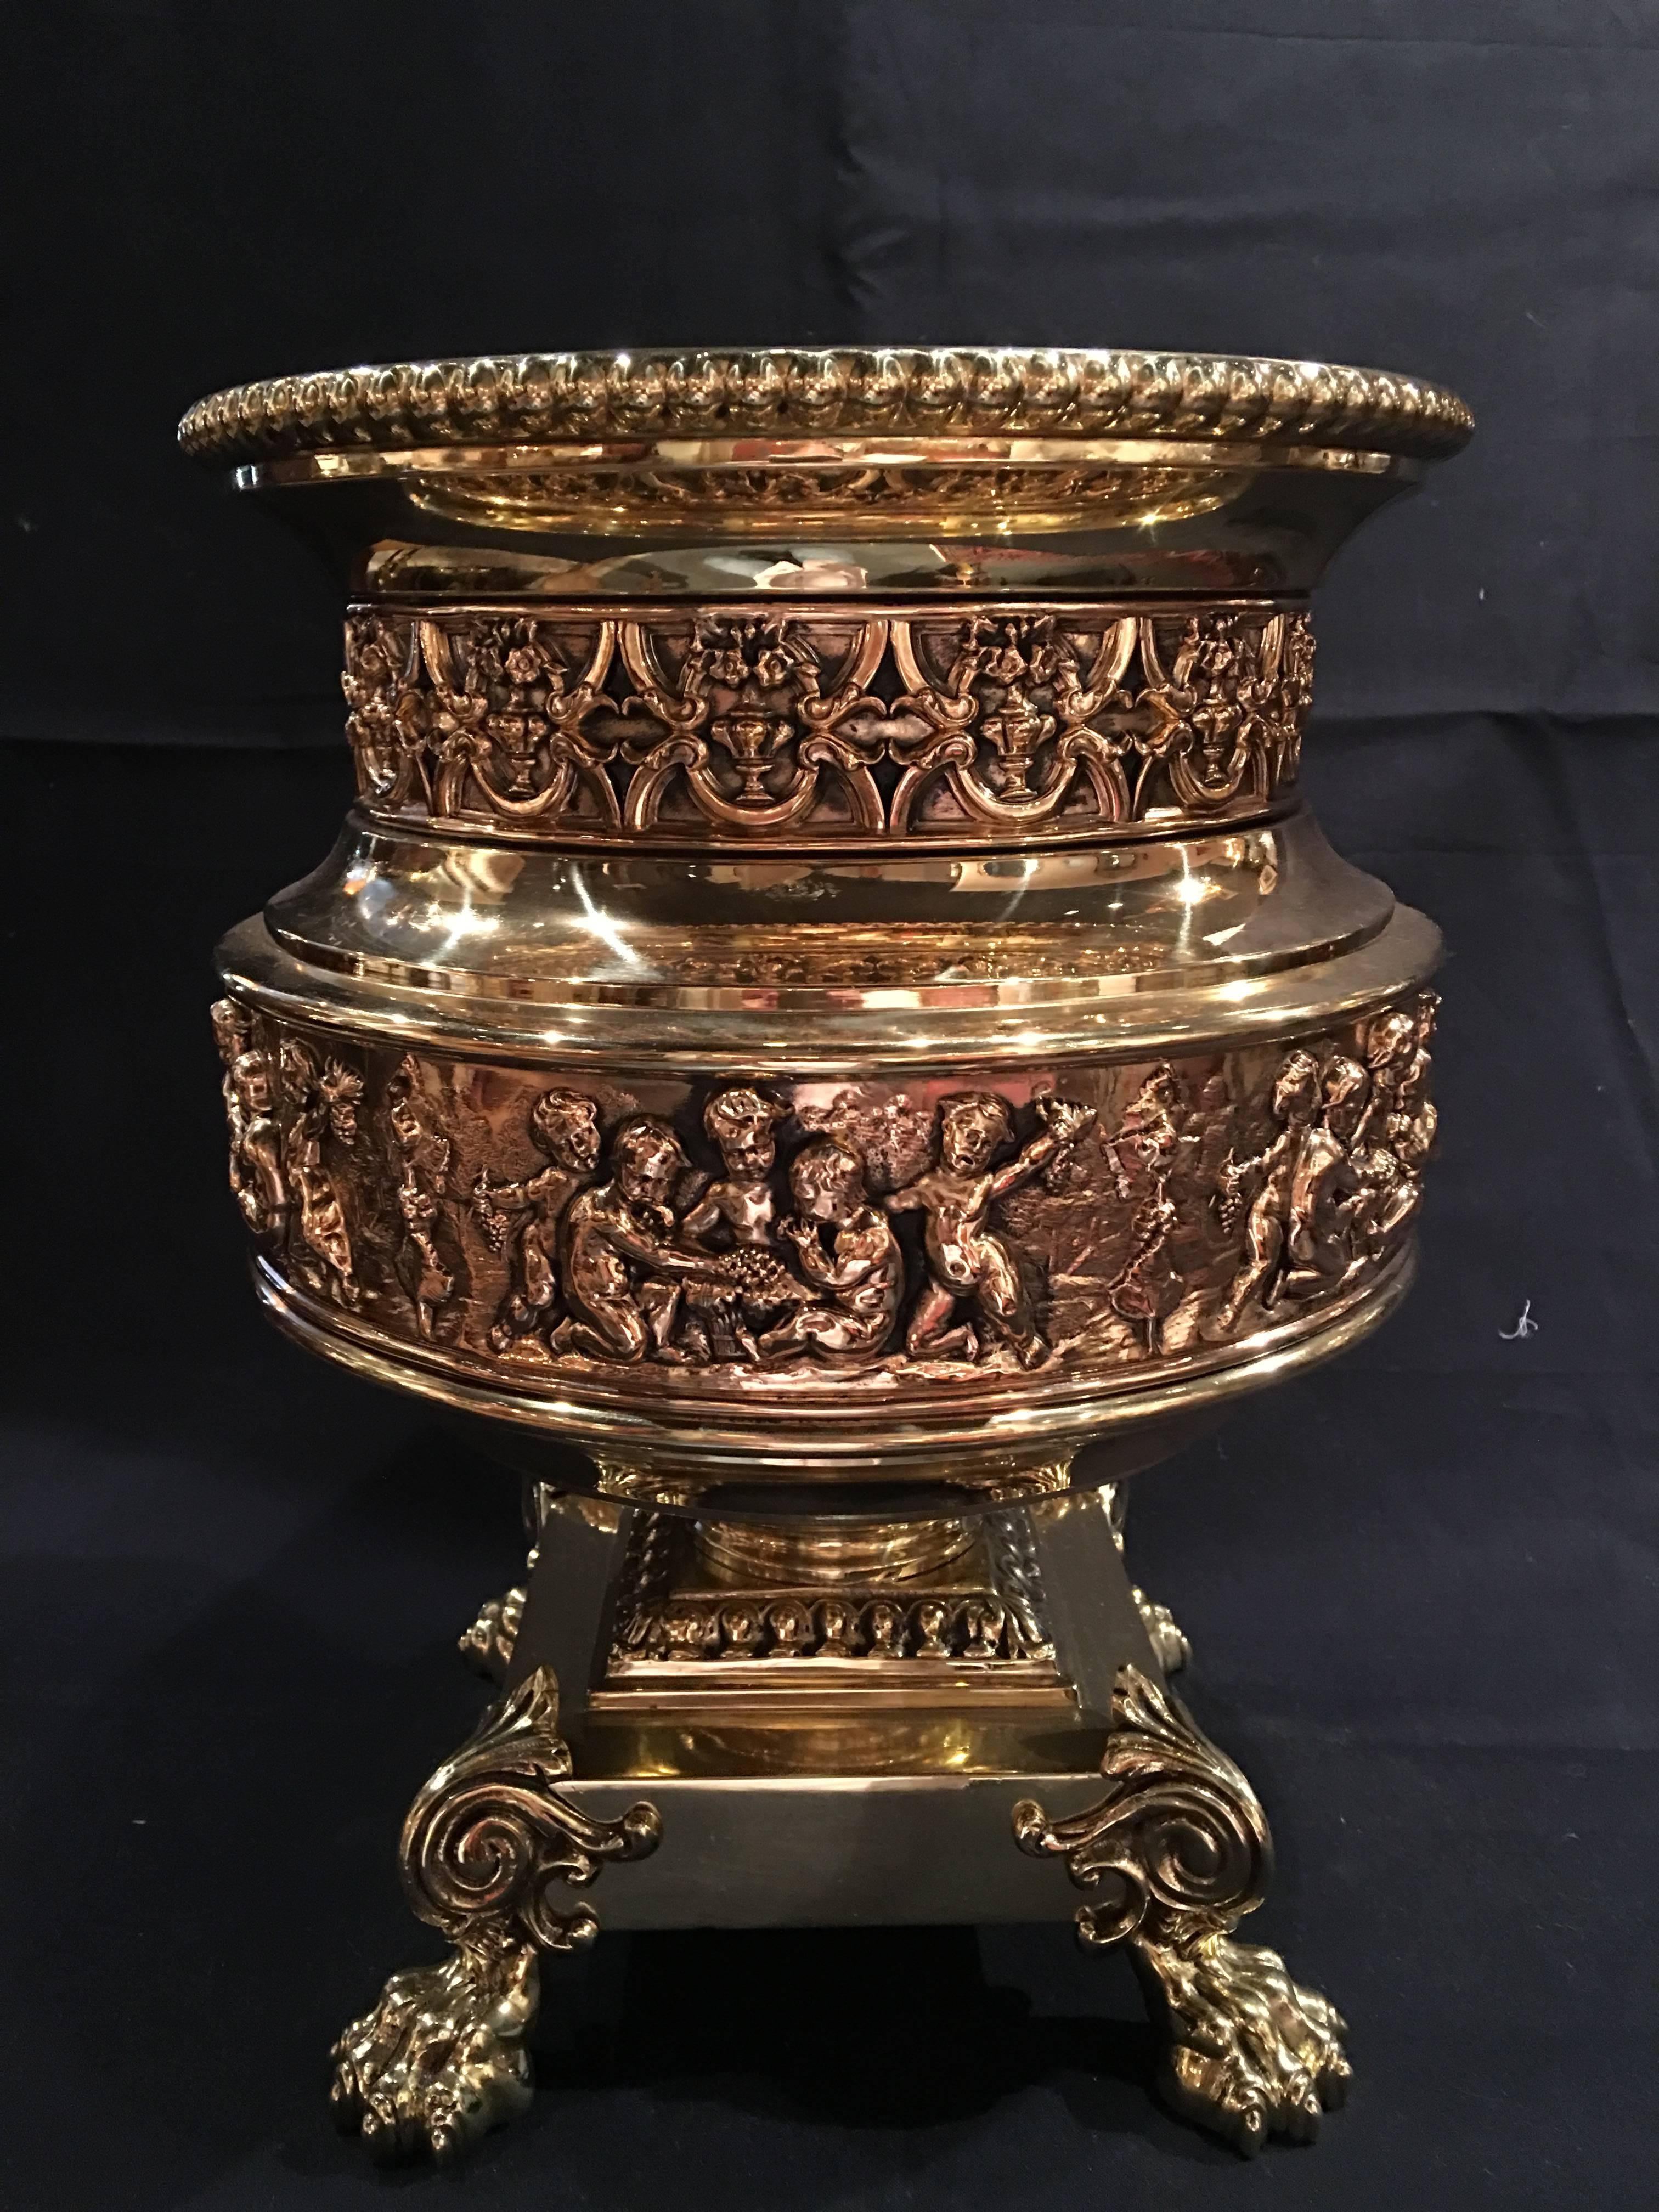 French polished brass jardiniere or container on pedestal, 19th century.